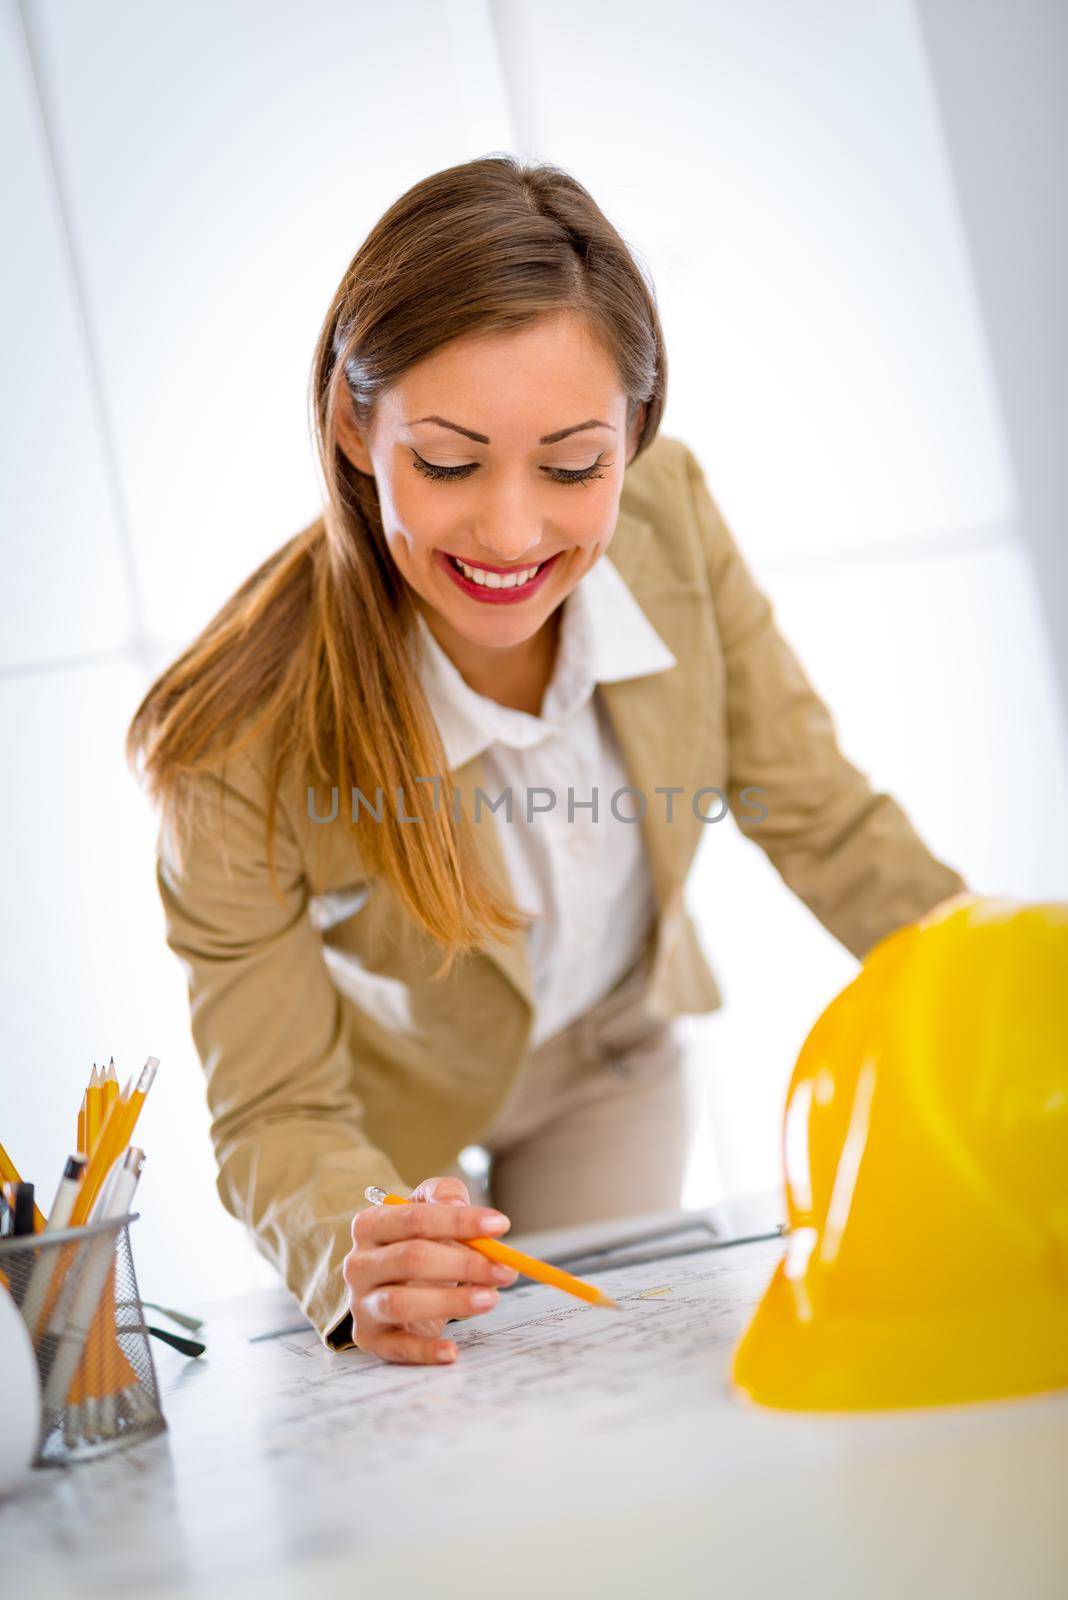 Smiling young woman architect constructor analyzing blueprint at desk in office. 